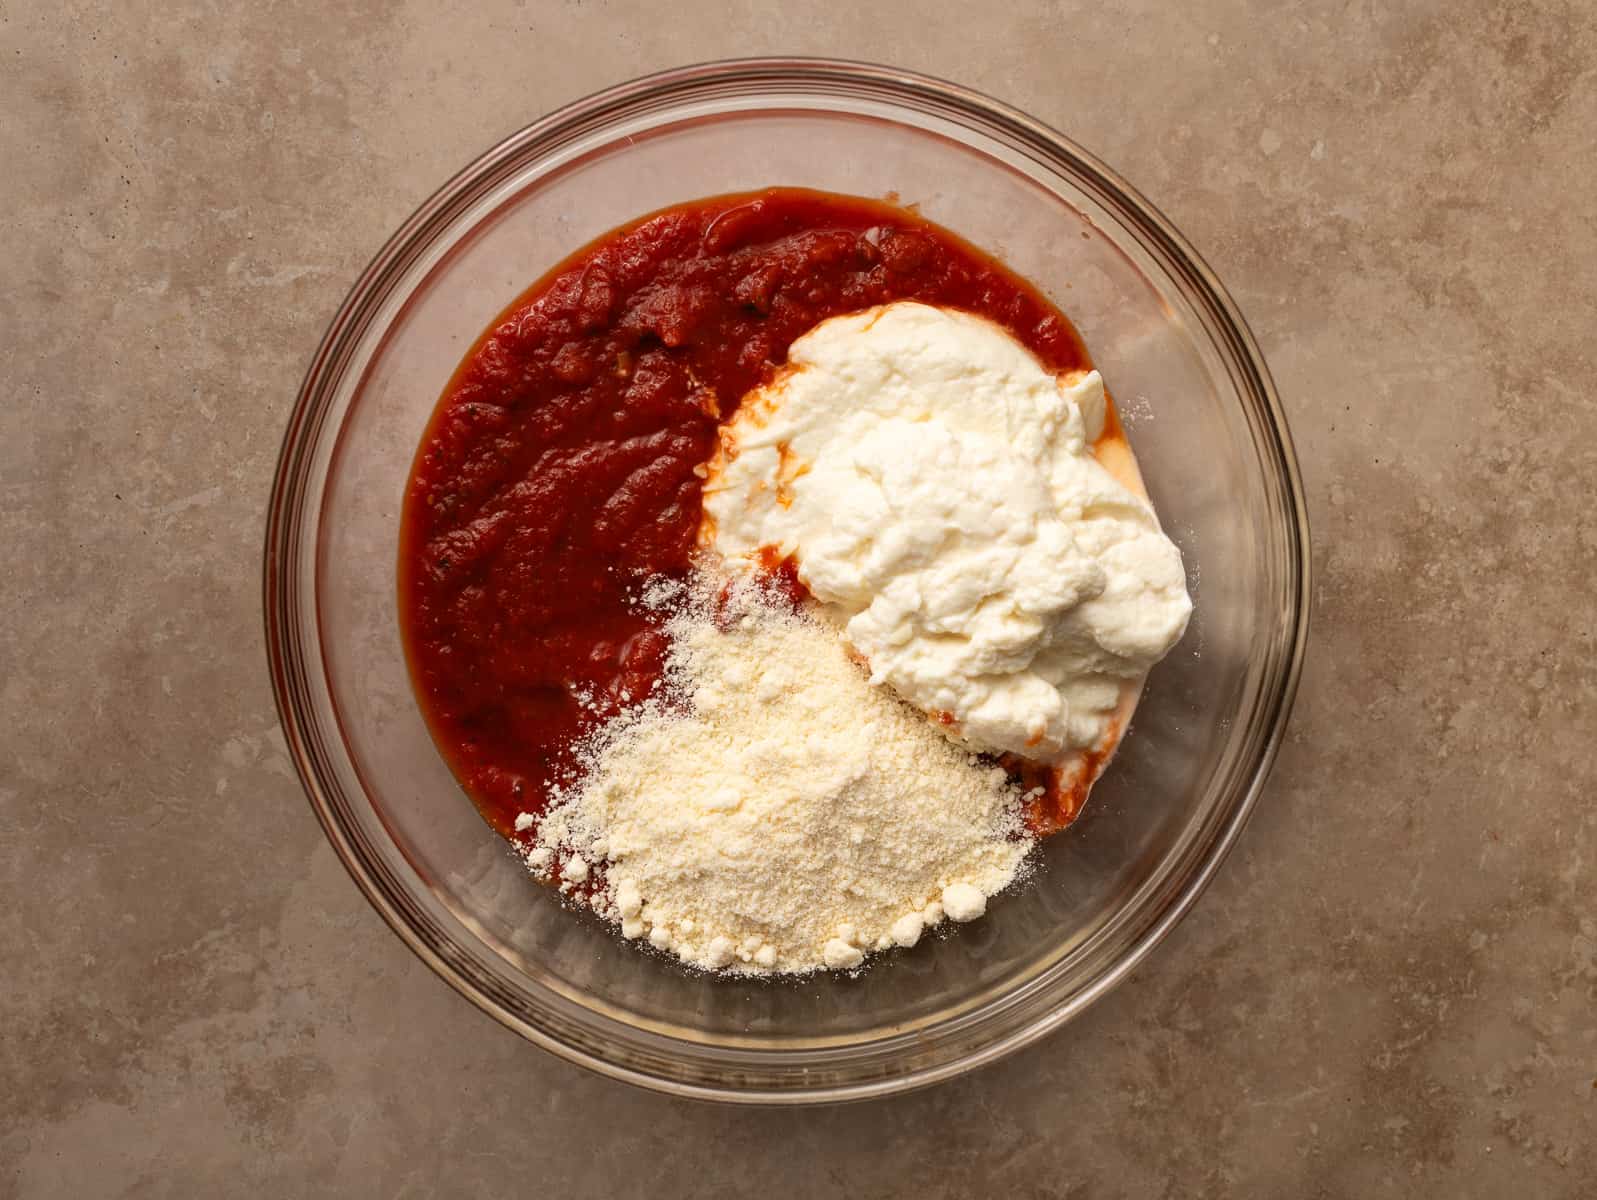 Glass bowl with sauce, ricotta, egg and cheese.